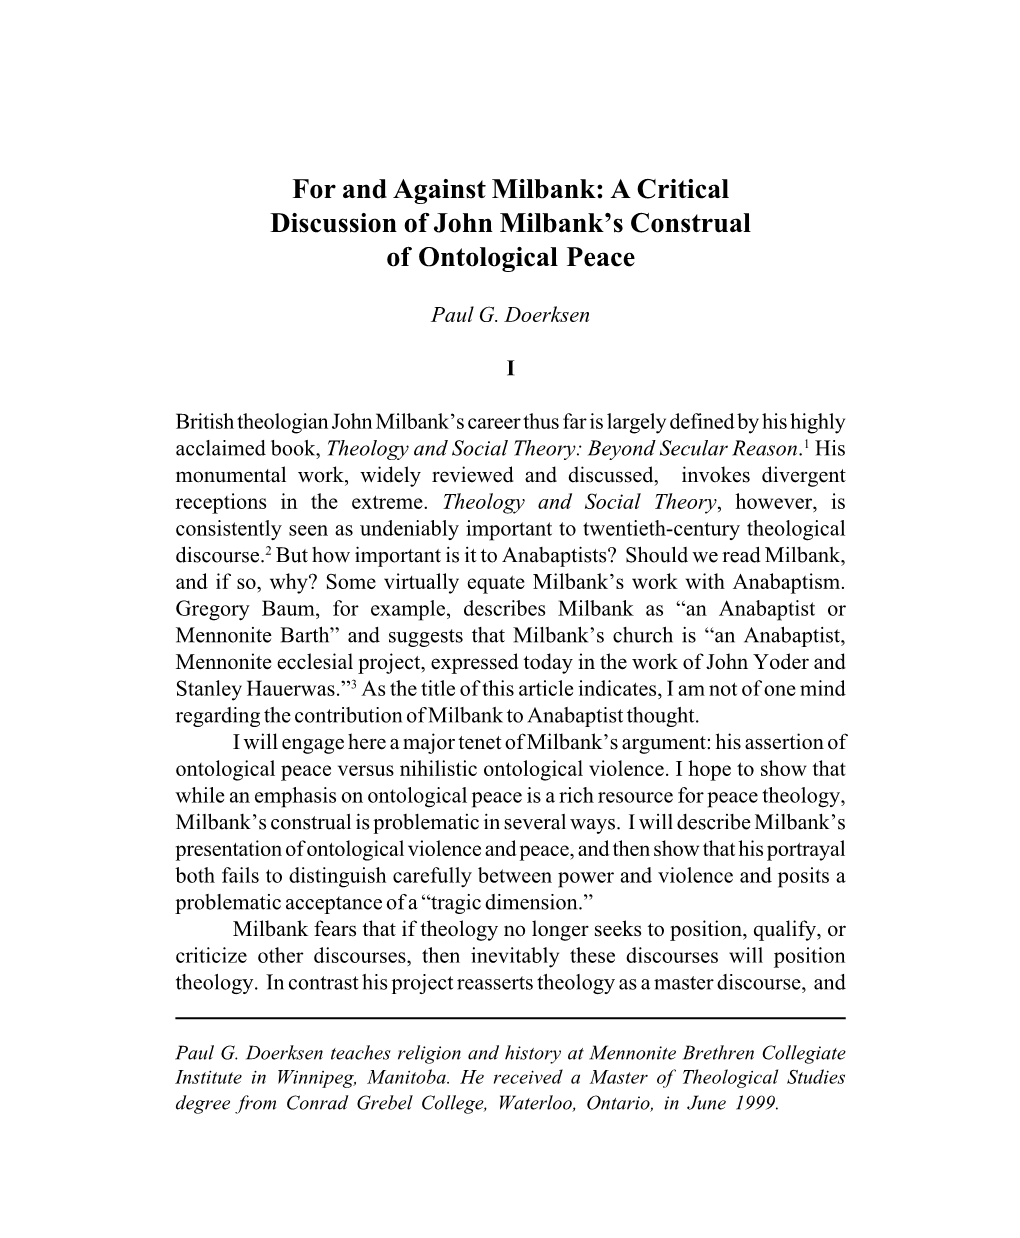 A Critical Discussion of John Milbank's Construal of Ontological Peace